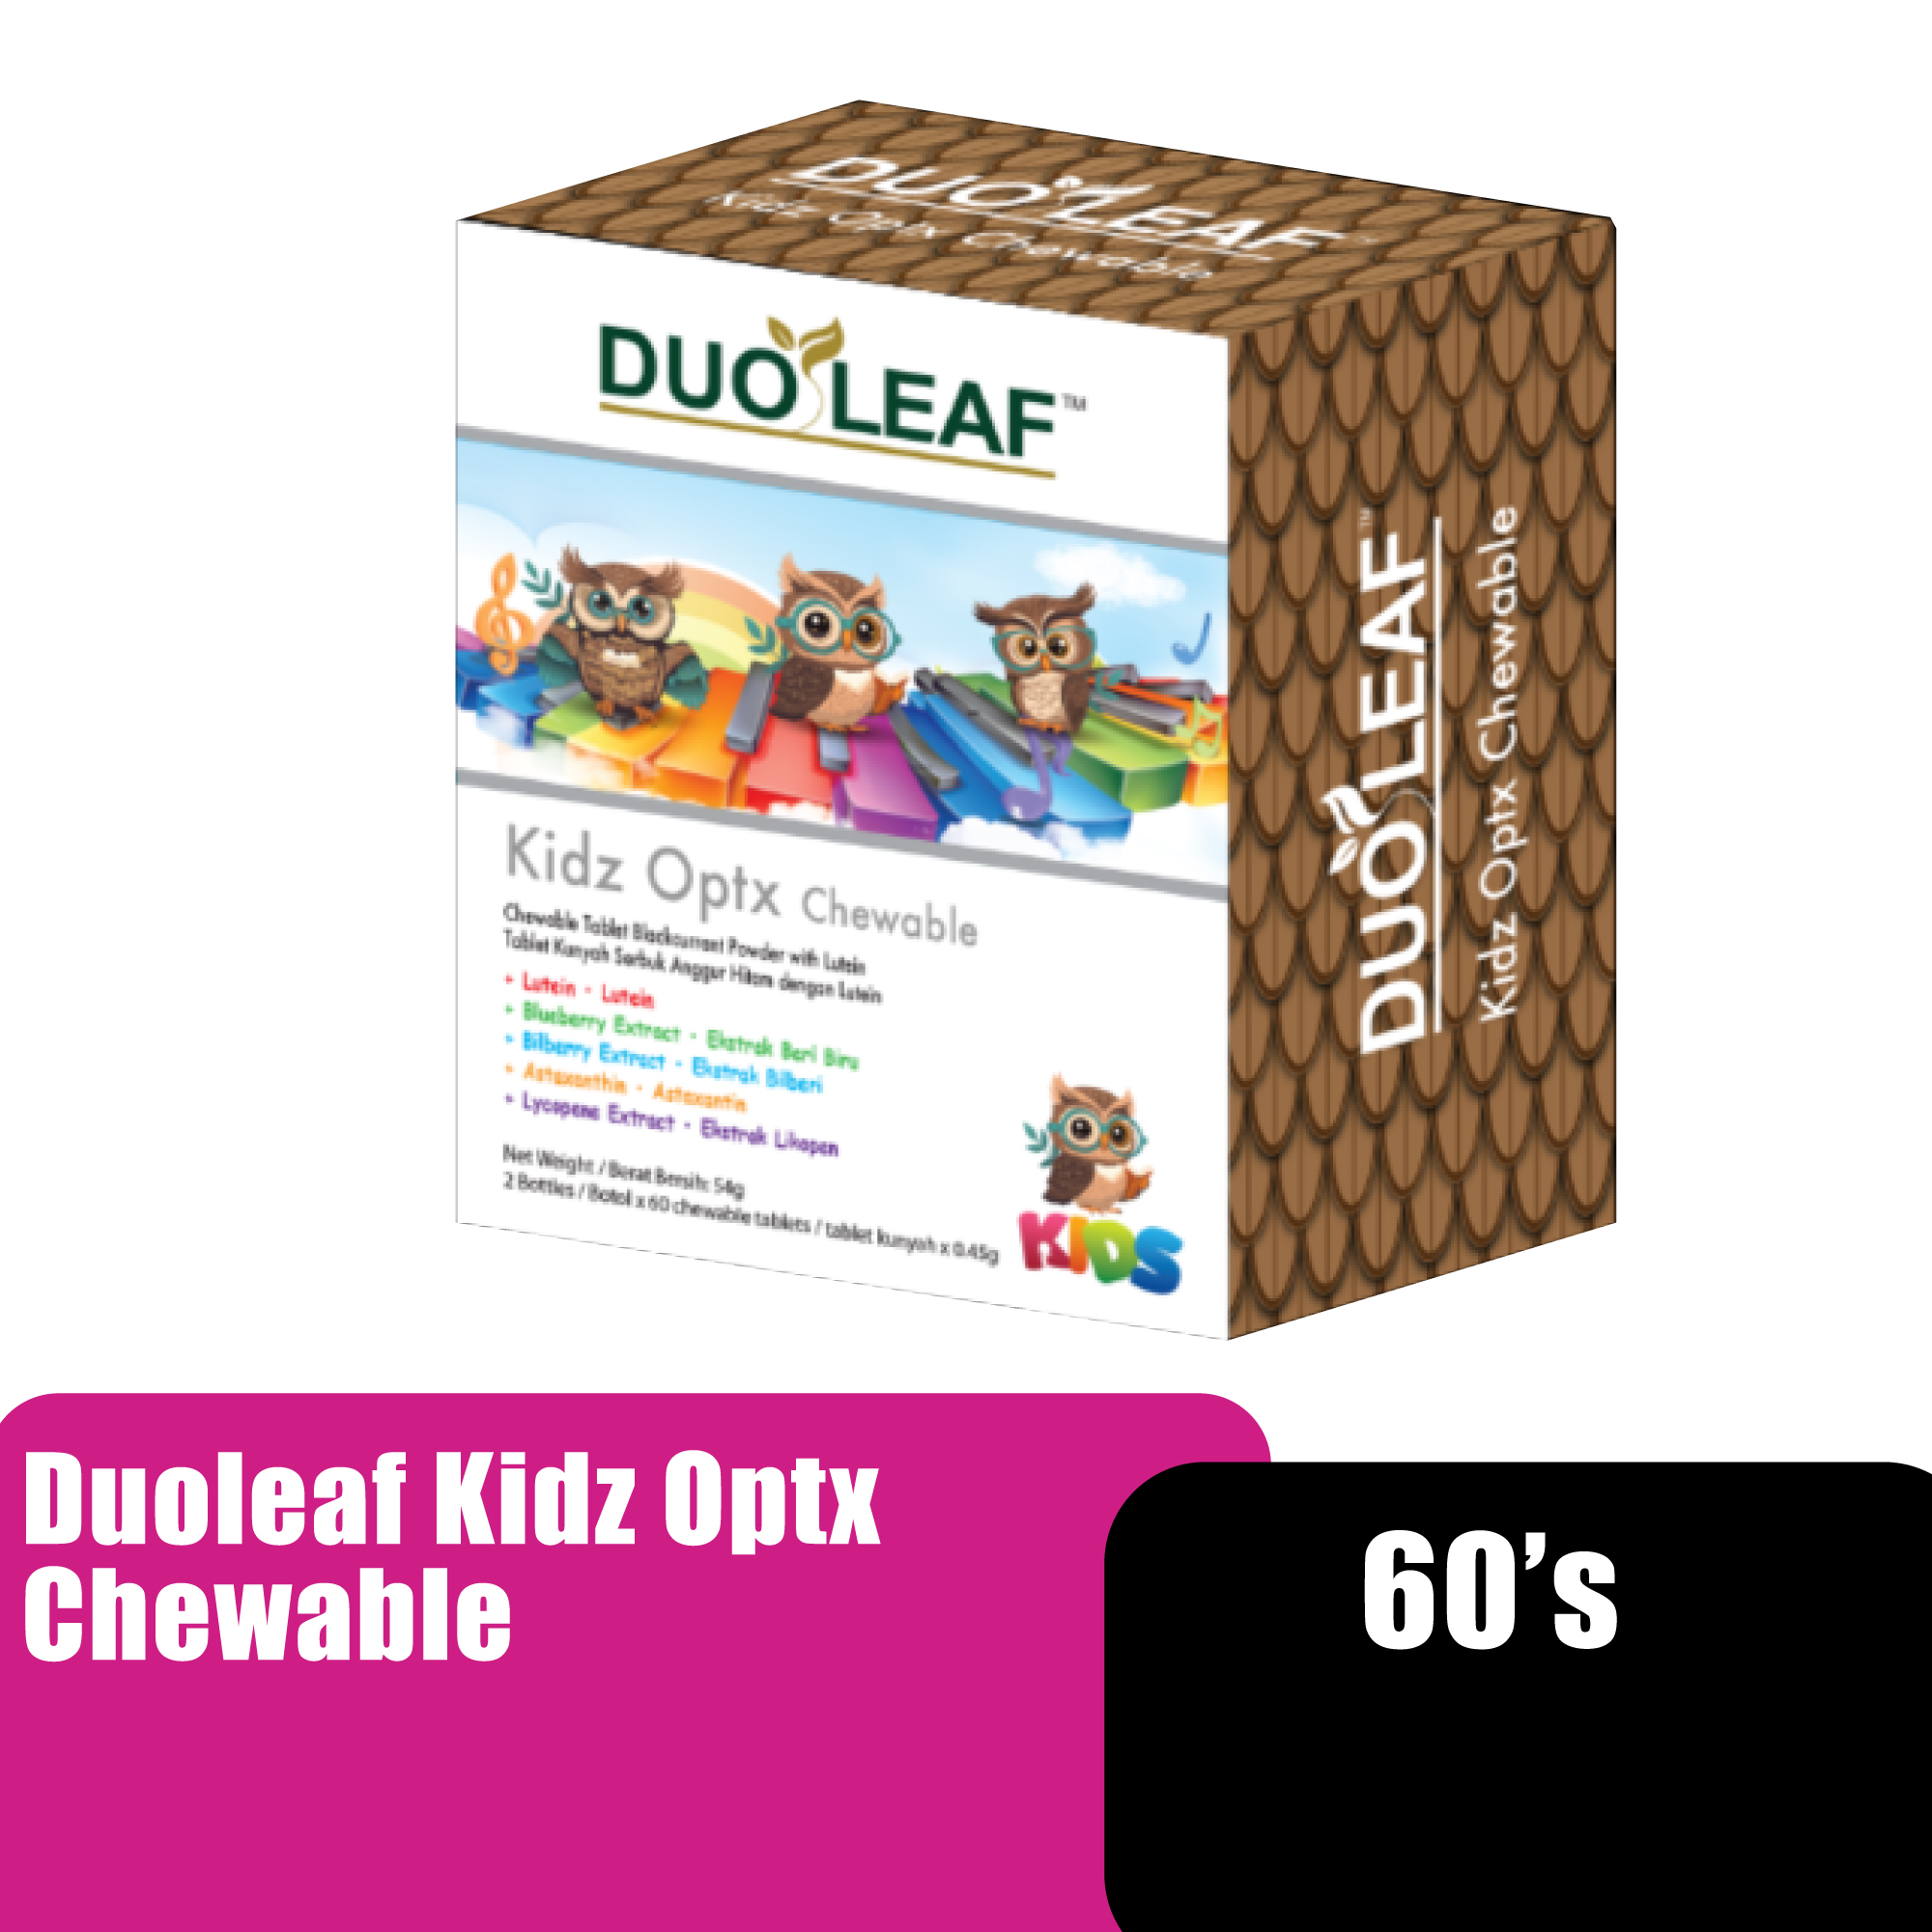 Duoleaf Kids Optx Chewable Tablet 60'S with Lutein for Healthy Vision, Eye & Eye Care